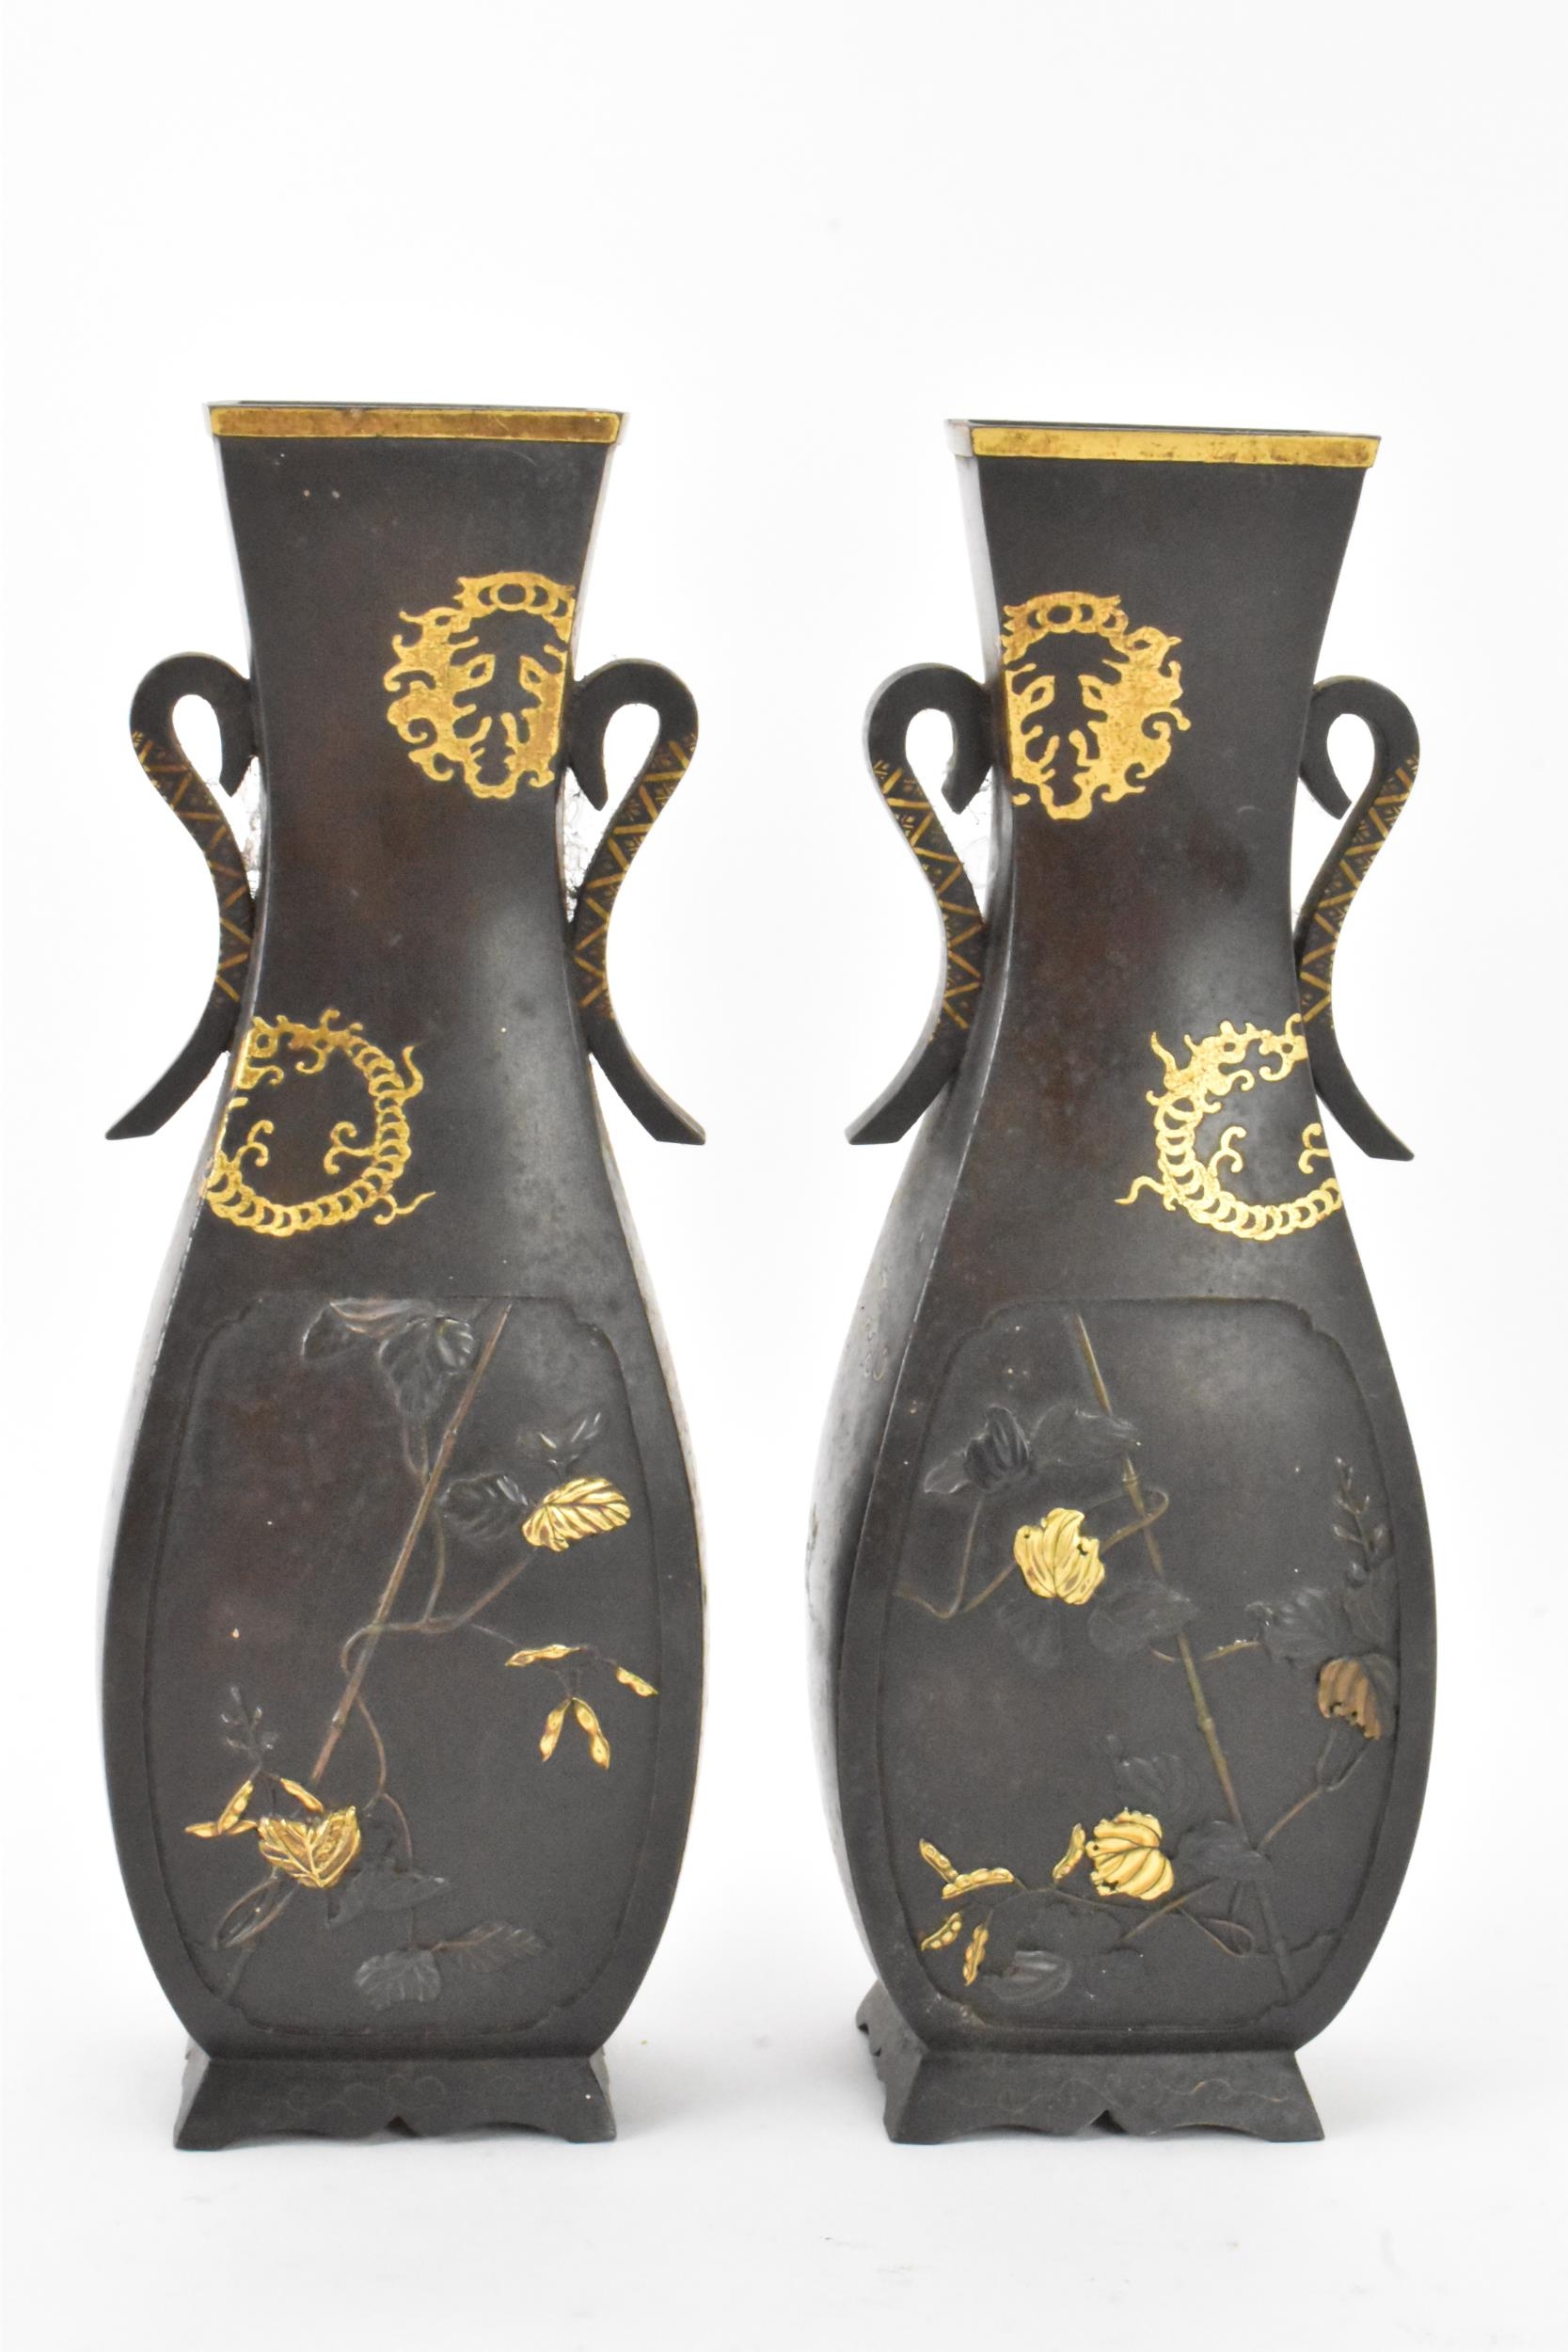 A pair of Japanese Meiji period iron vases, decorated with panels depicting birds and flowers in - Image 3 of 6